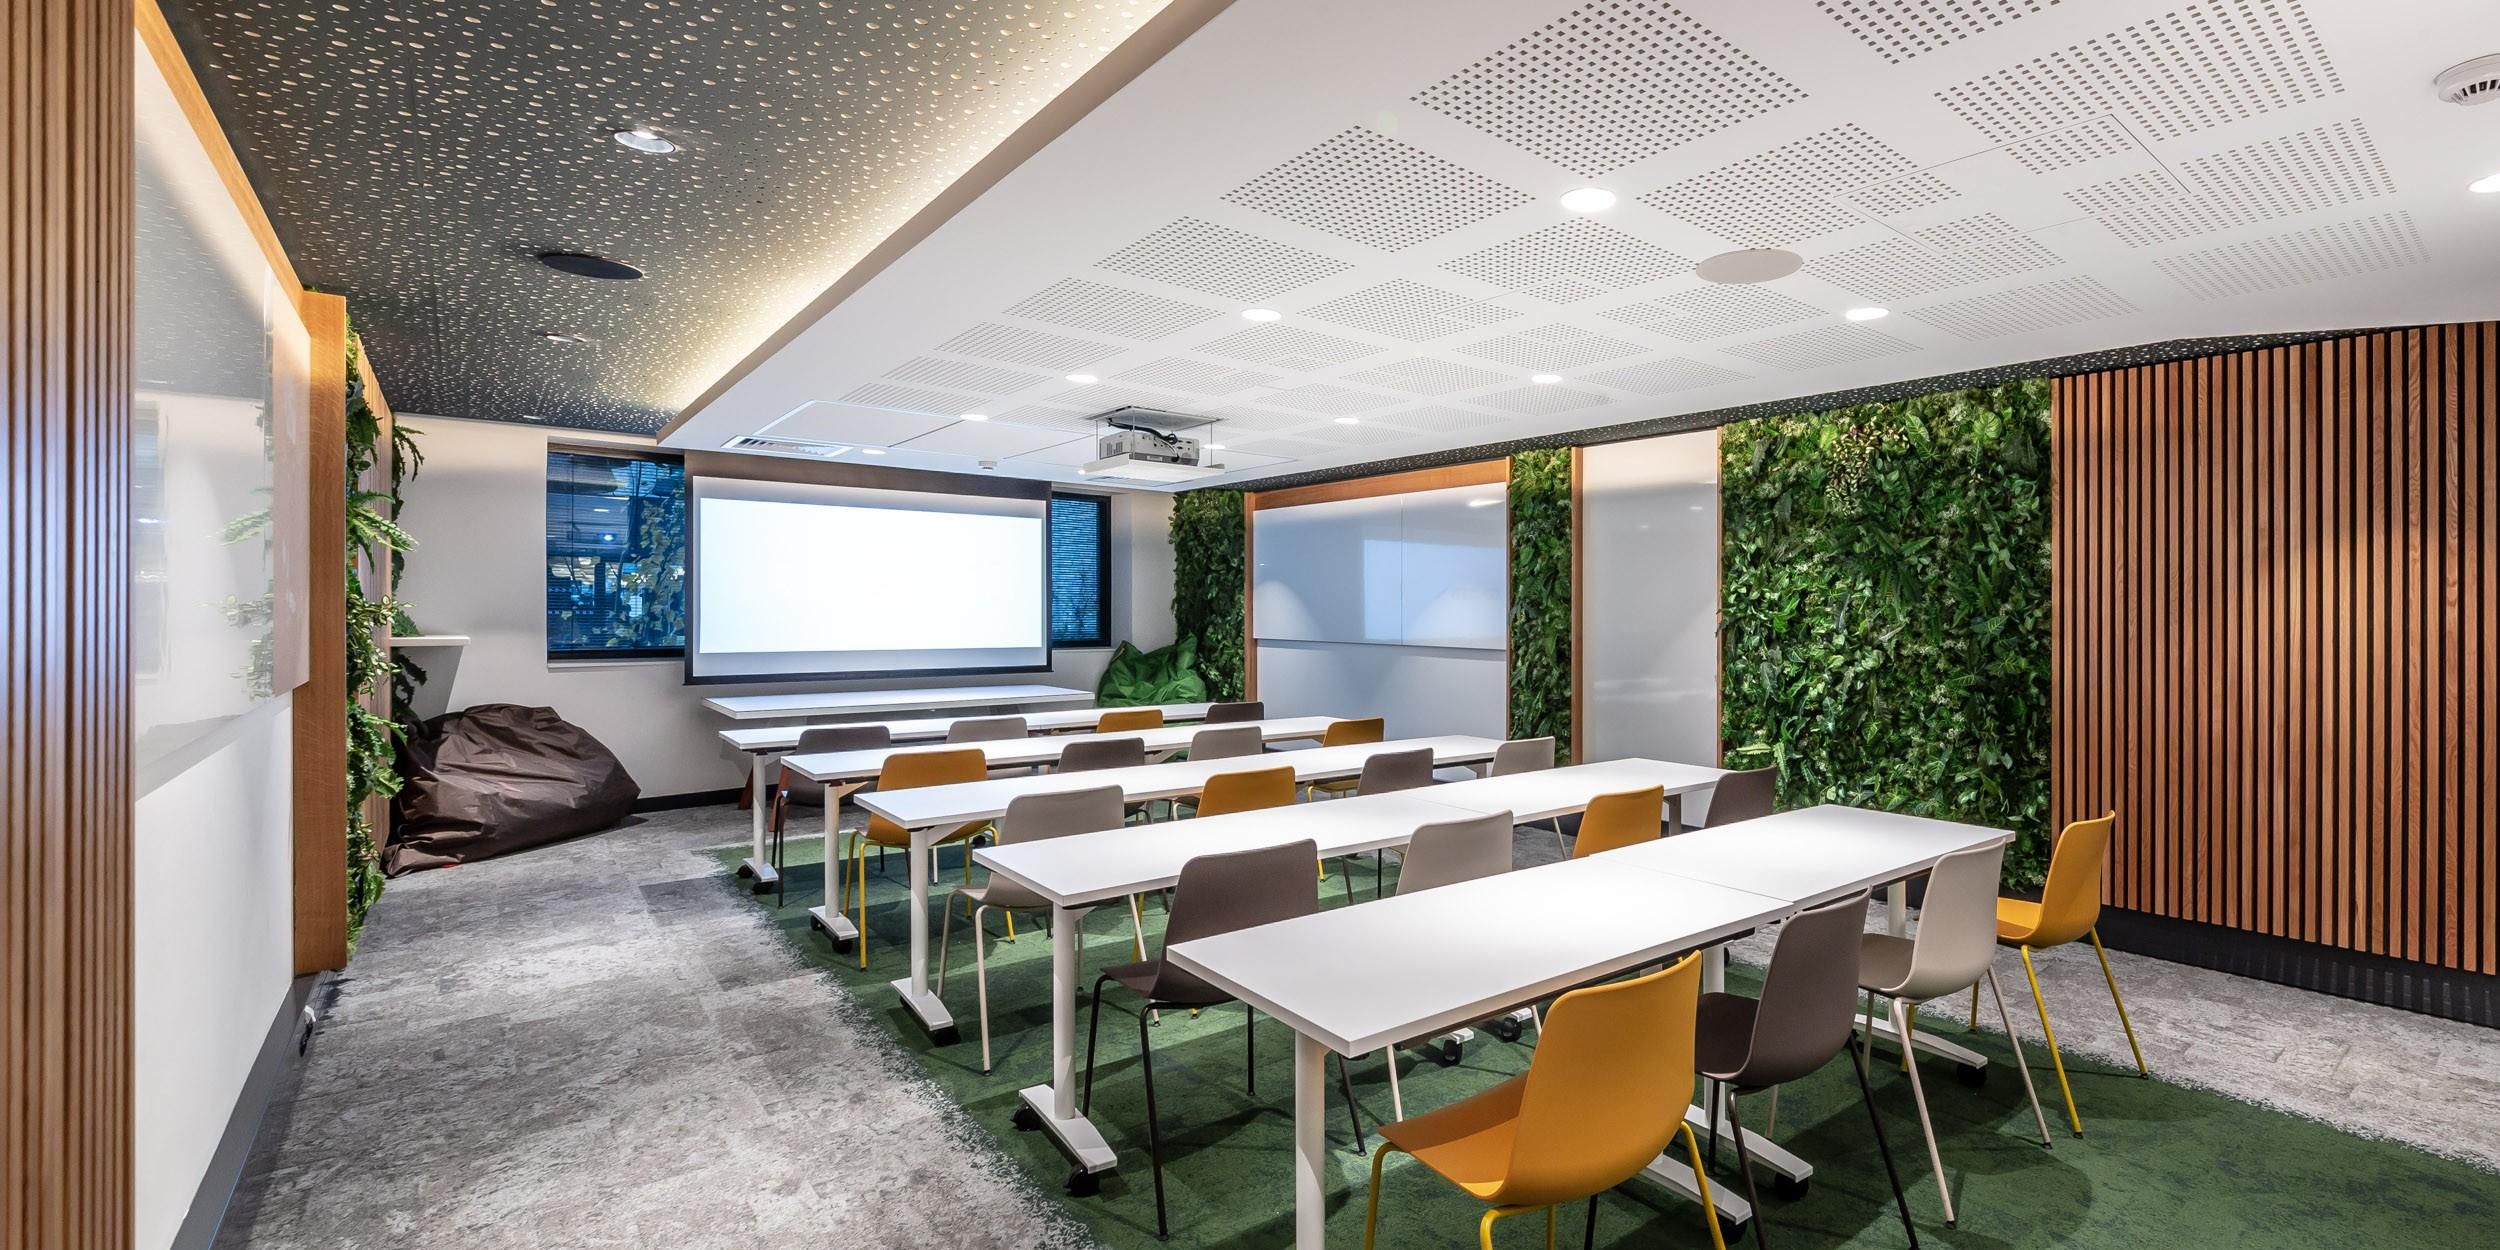 You can host up to 45 guests in our spacious, well-equipped Lotus meeting room, which has a video projector and complimentary Wi-Fi to help get your message across. It overlooks the garden, which is a handy space for breakout sessions to recharge.